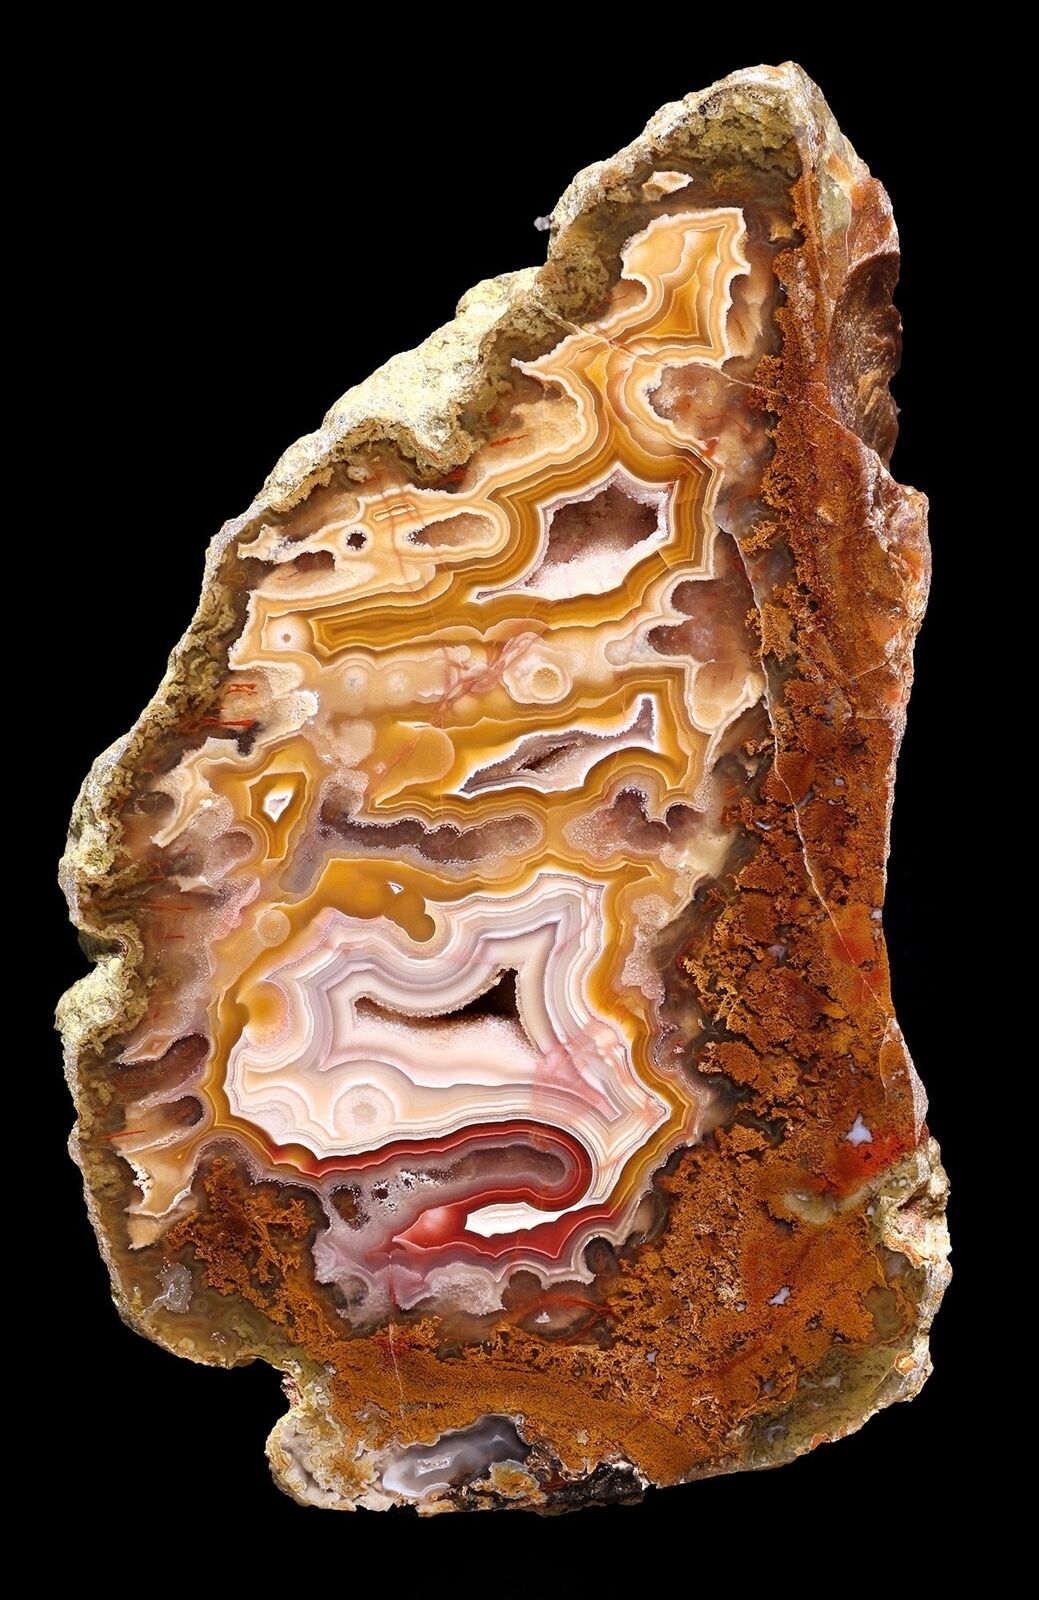 Collectors Grade Agua Nueva Agate from Mexico Polished